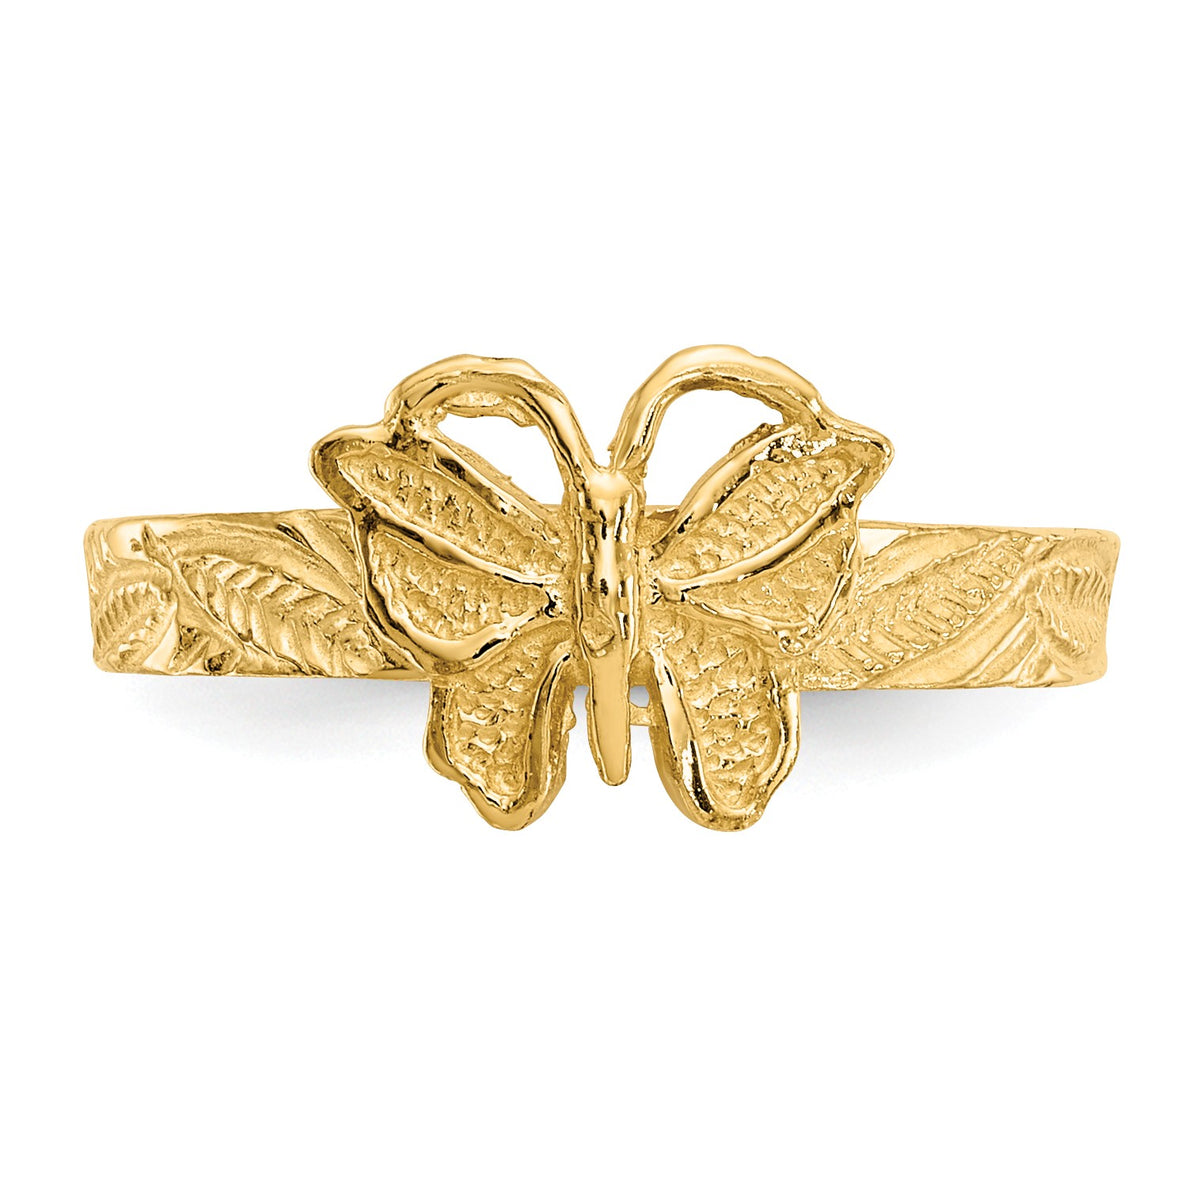 Alternate view of the Butterfly Toe Ring in 14 Karat Gold by The Black Bow Jewelry Co.